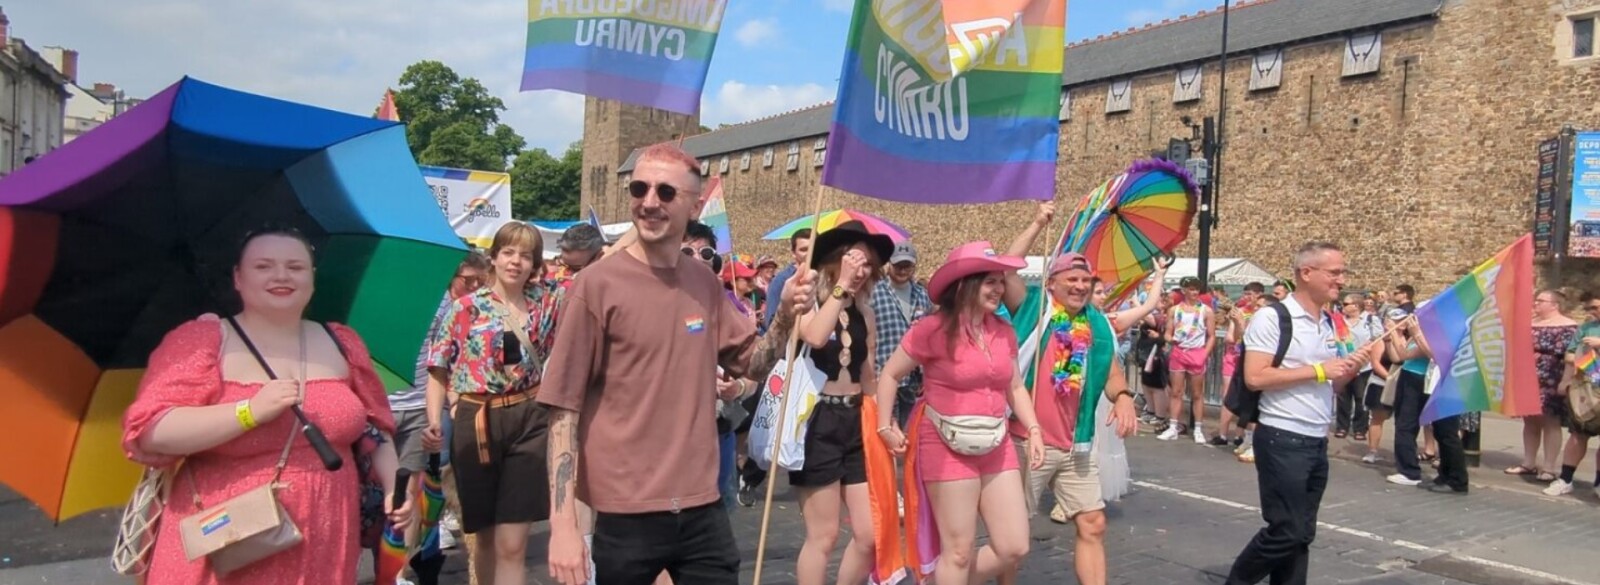 A group of people walking as part of a Pride parade.